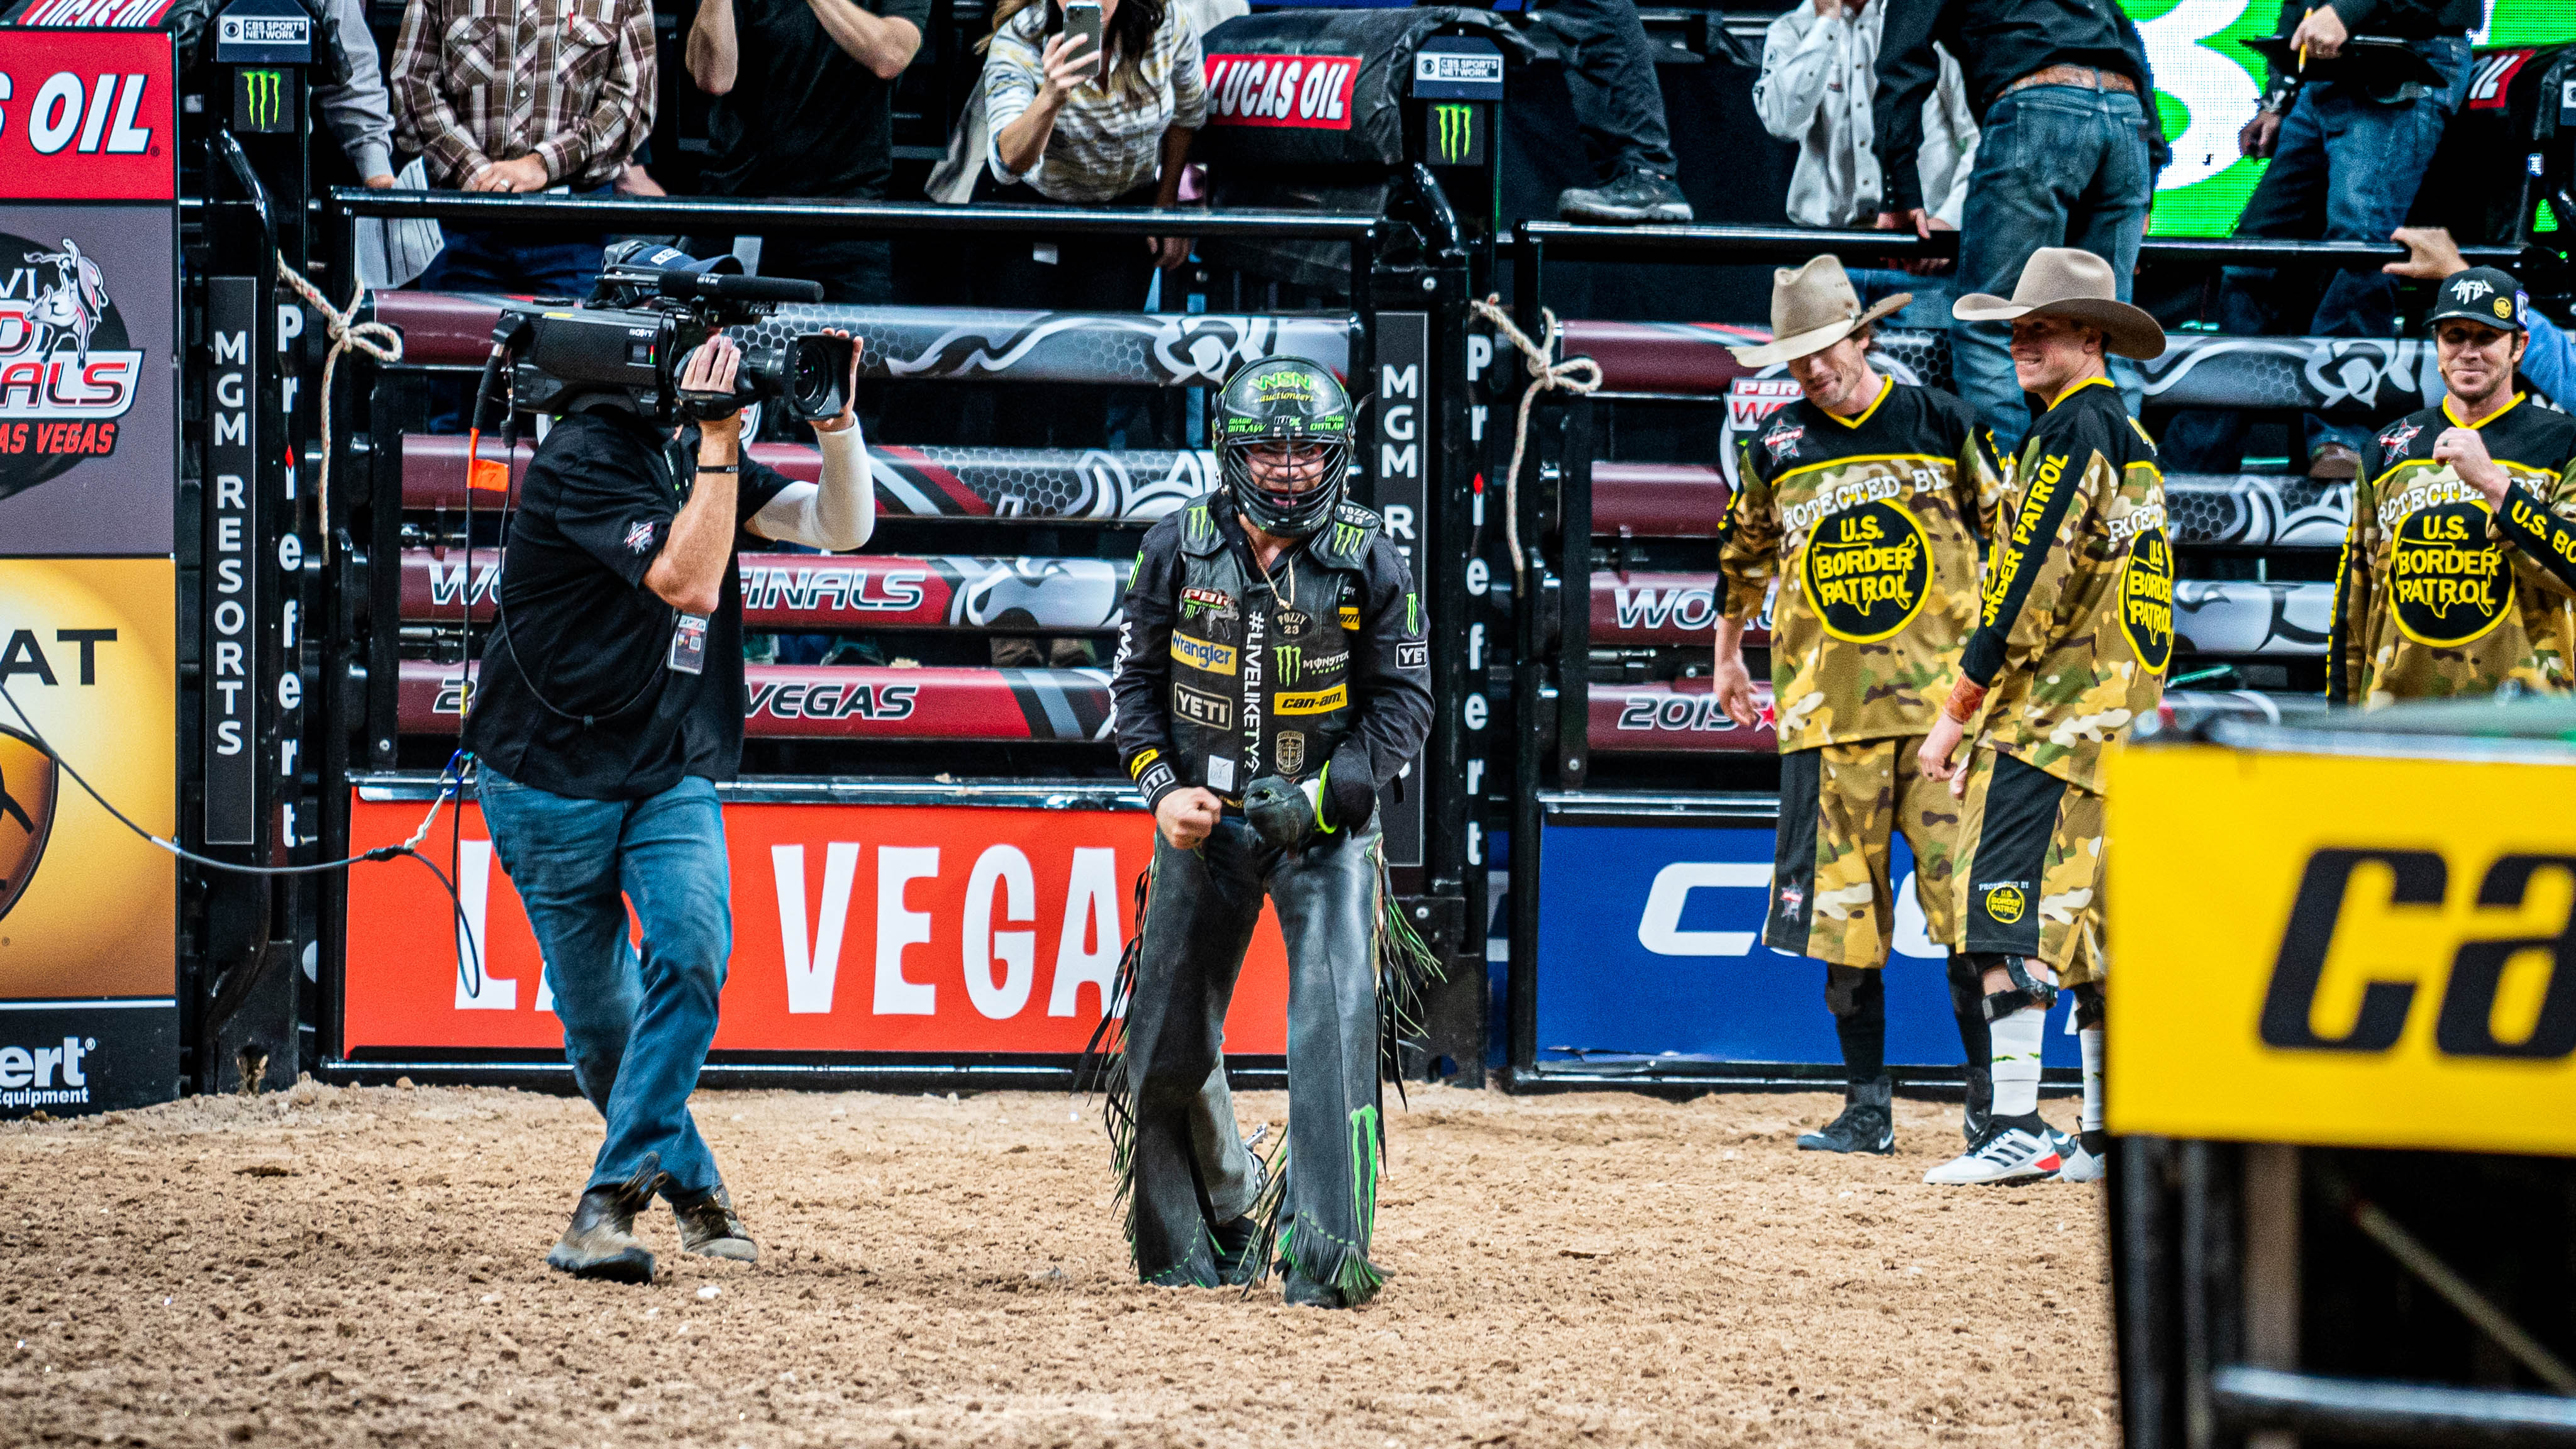 Chase Outlaw competing at a PBR Event